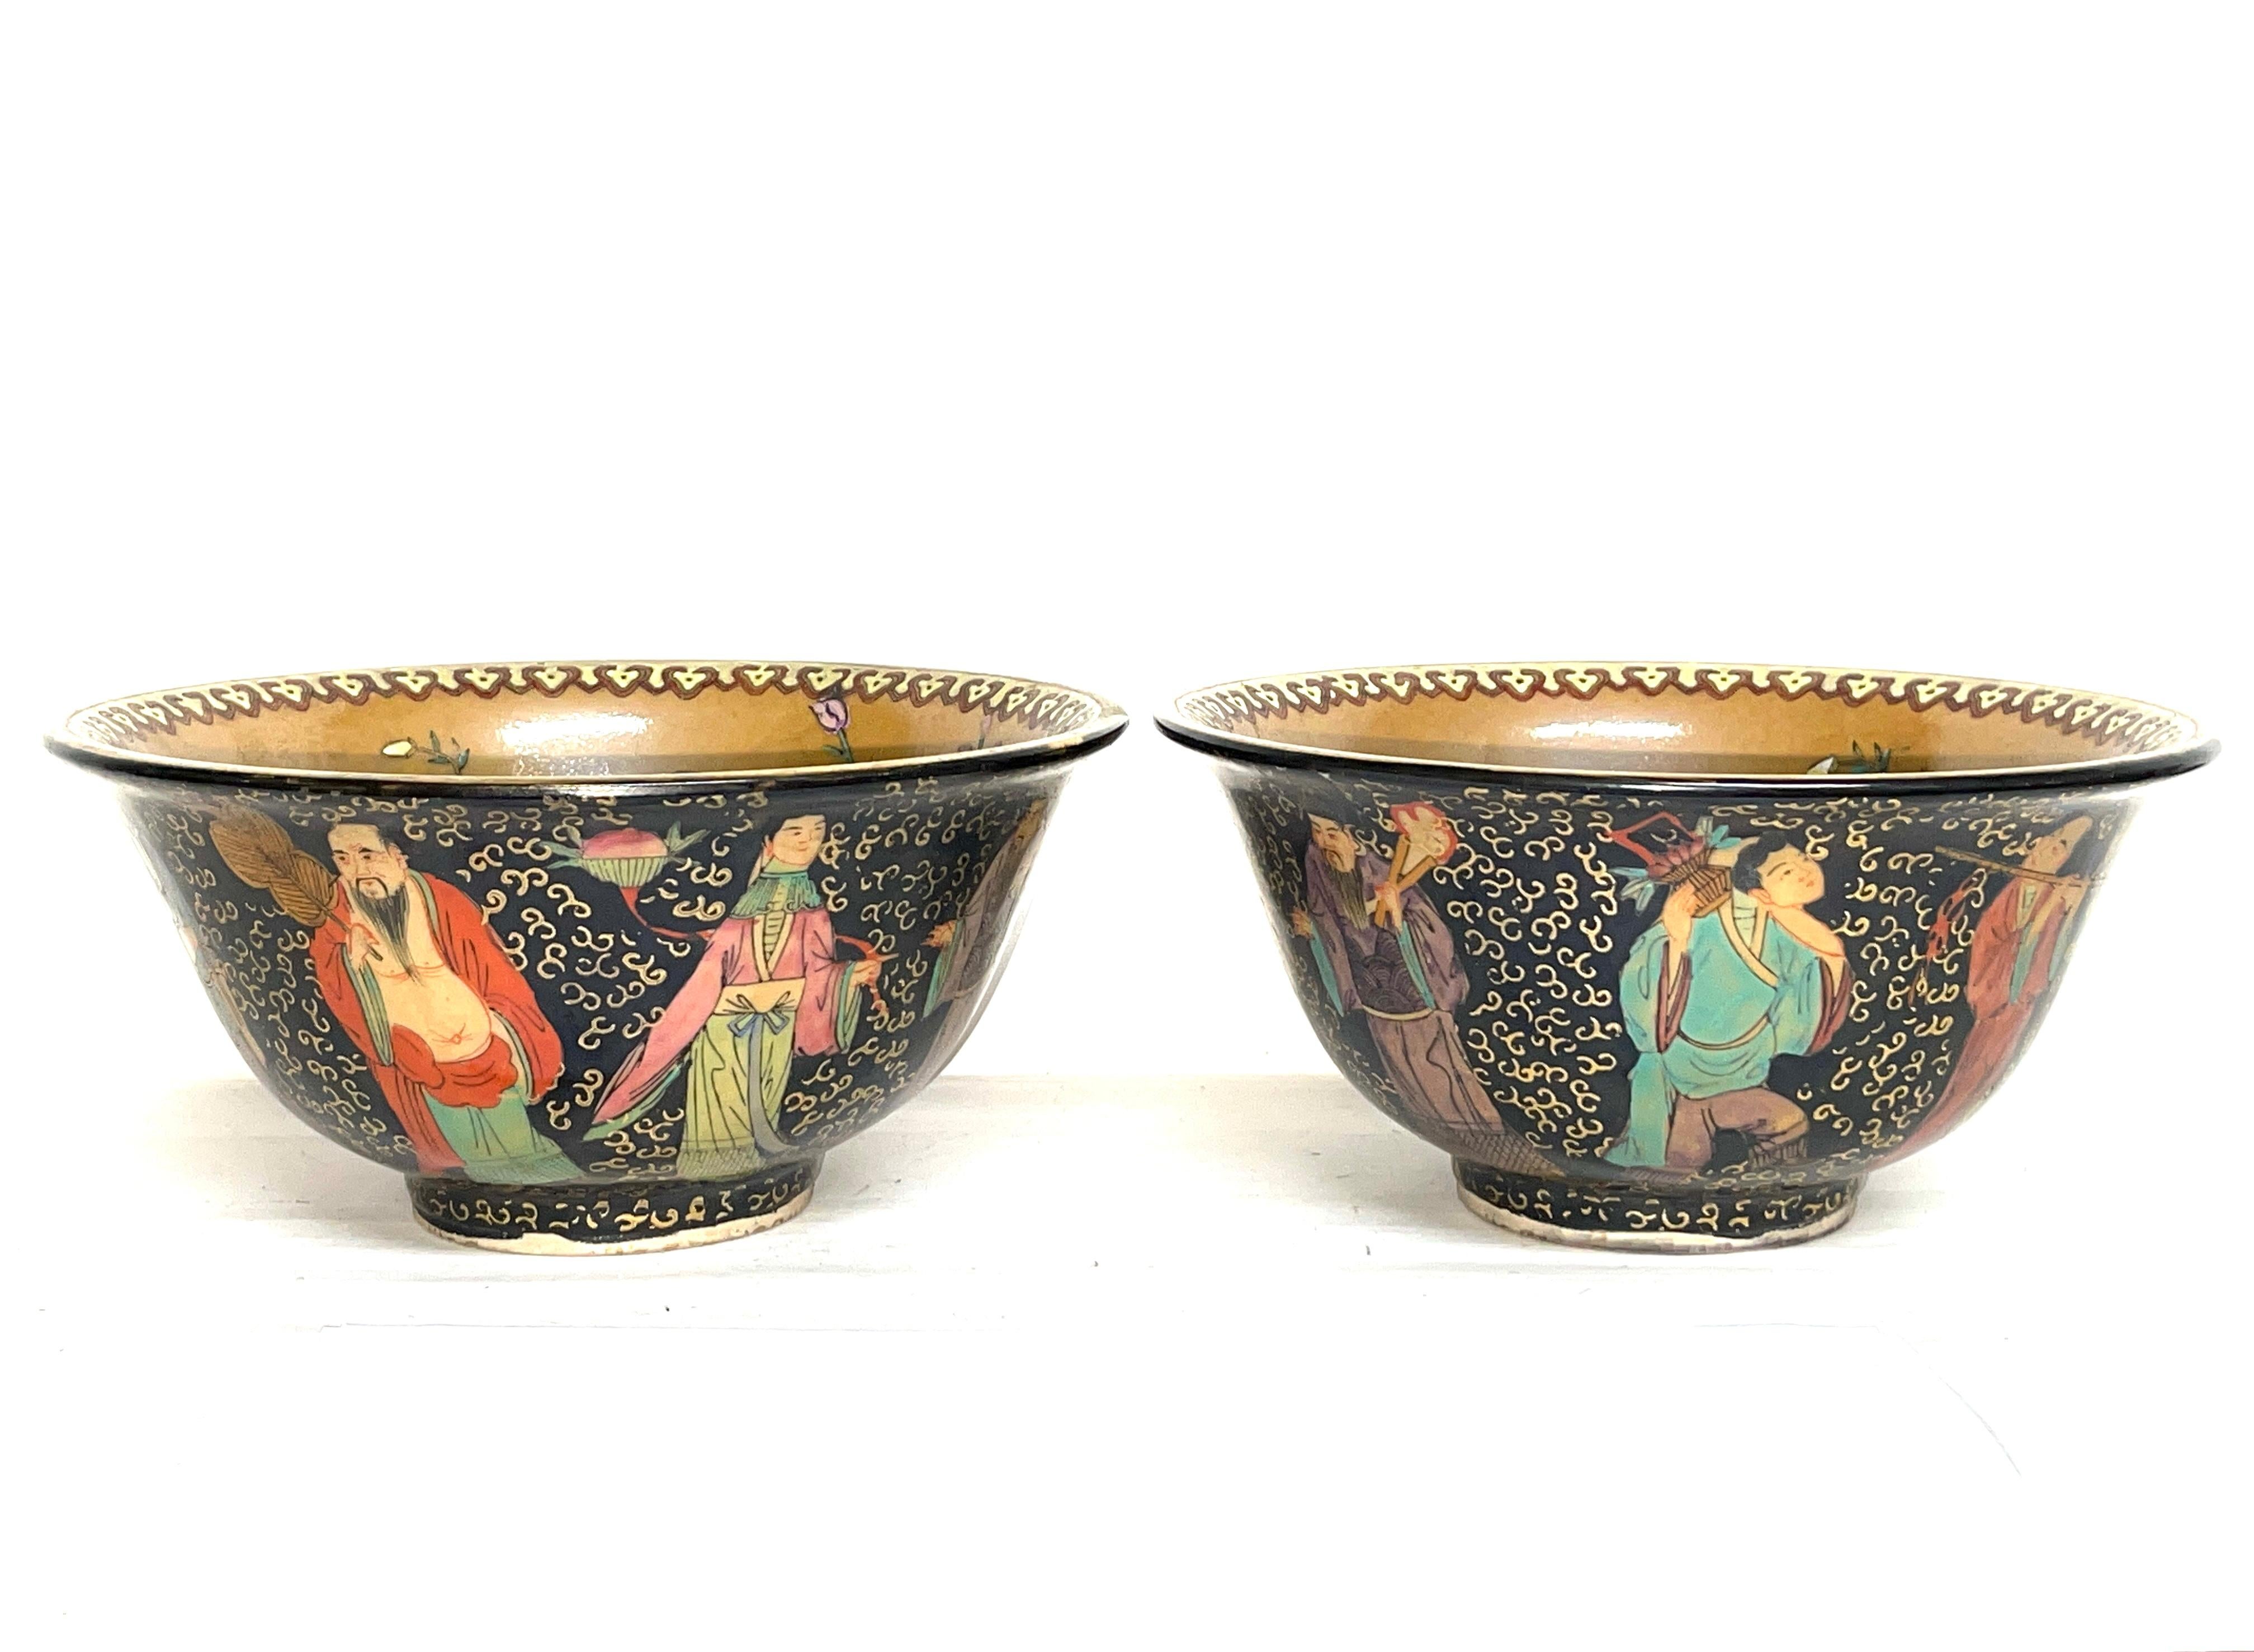 Painted Pair of Antique Chinese Ceramic Bowls, 20th Century, Asian Art For Sale